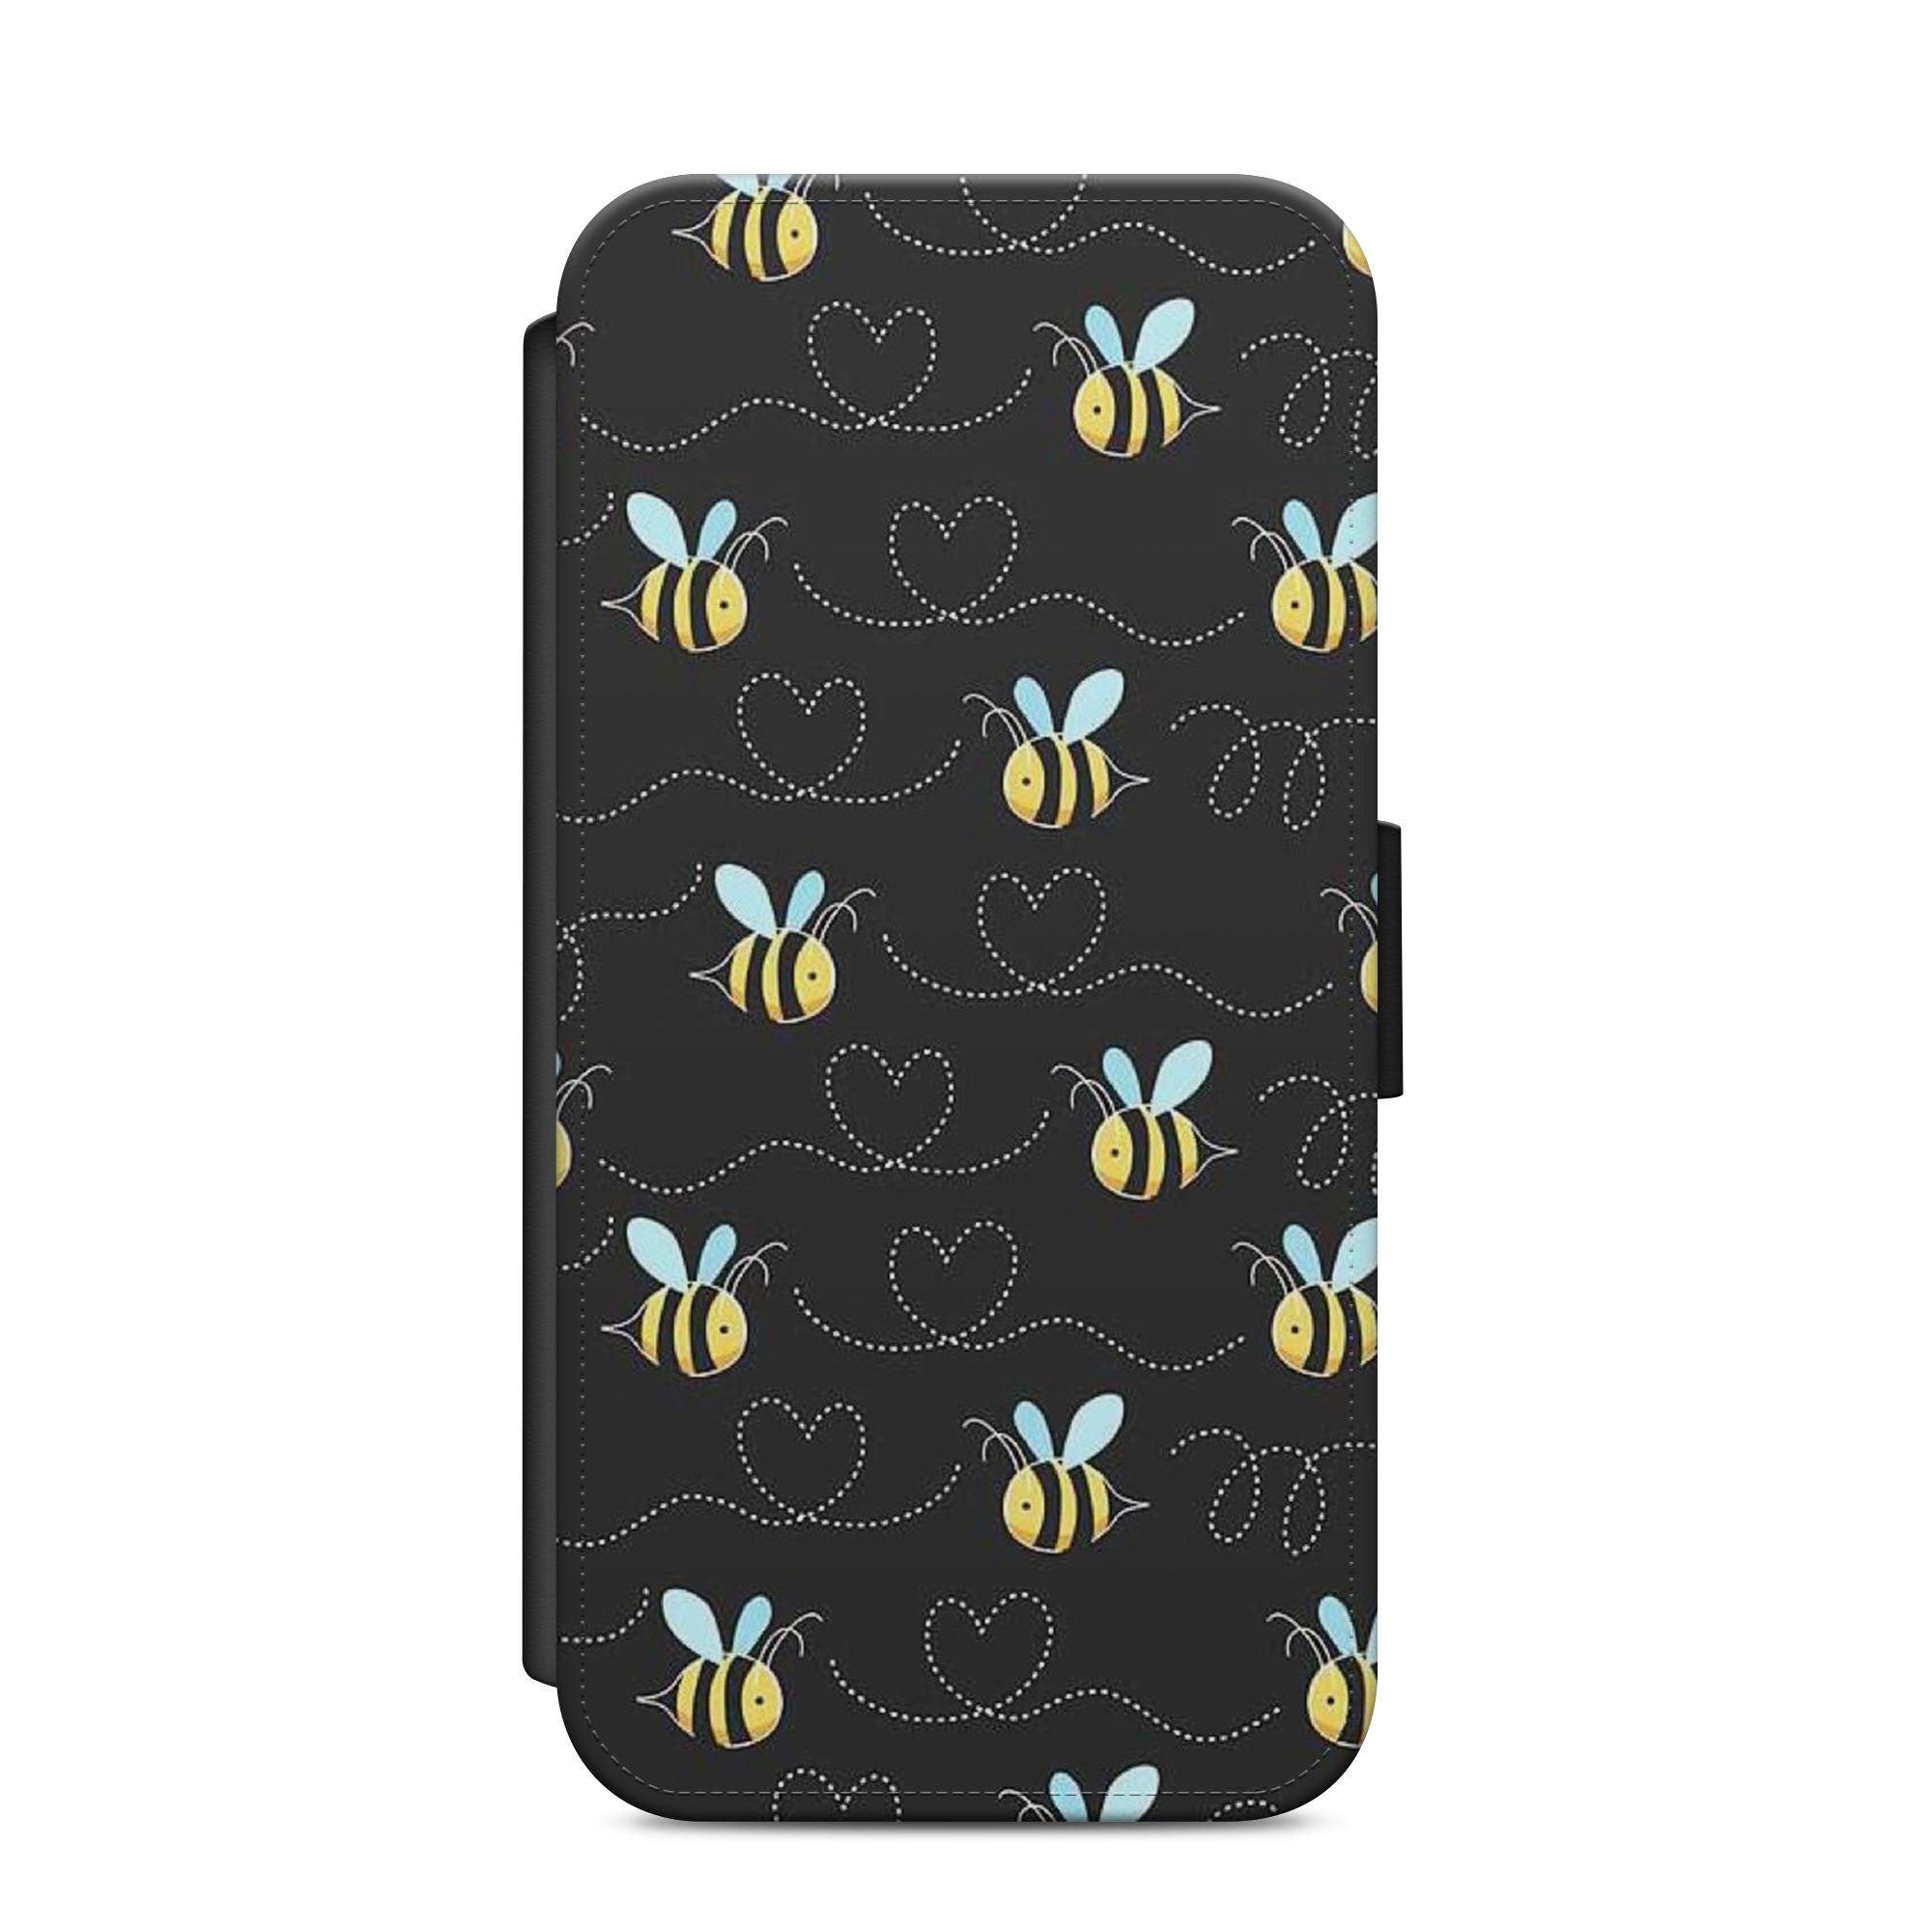 Bees & Hearts Faux Leather Flip Case Wallet for iPhone / Samsung